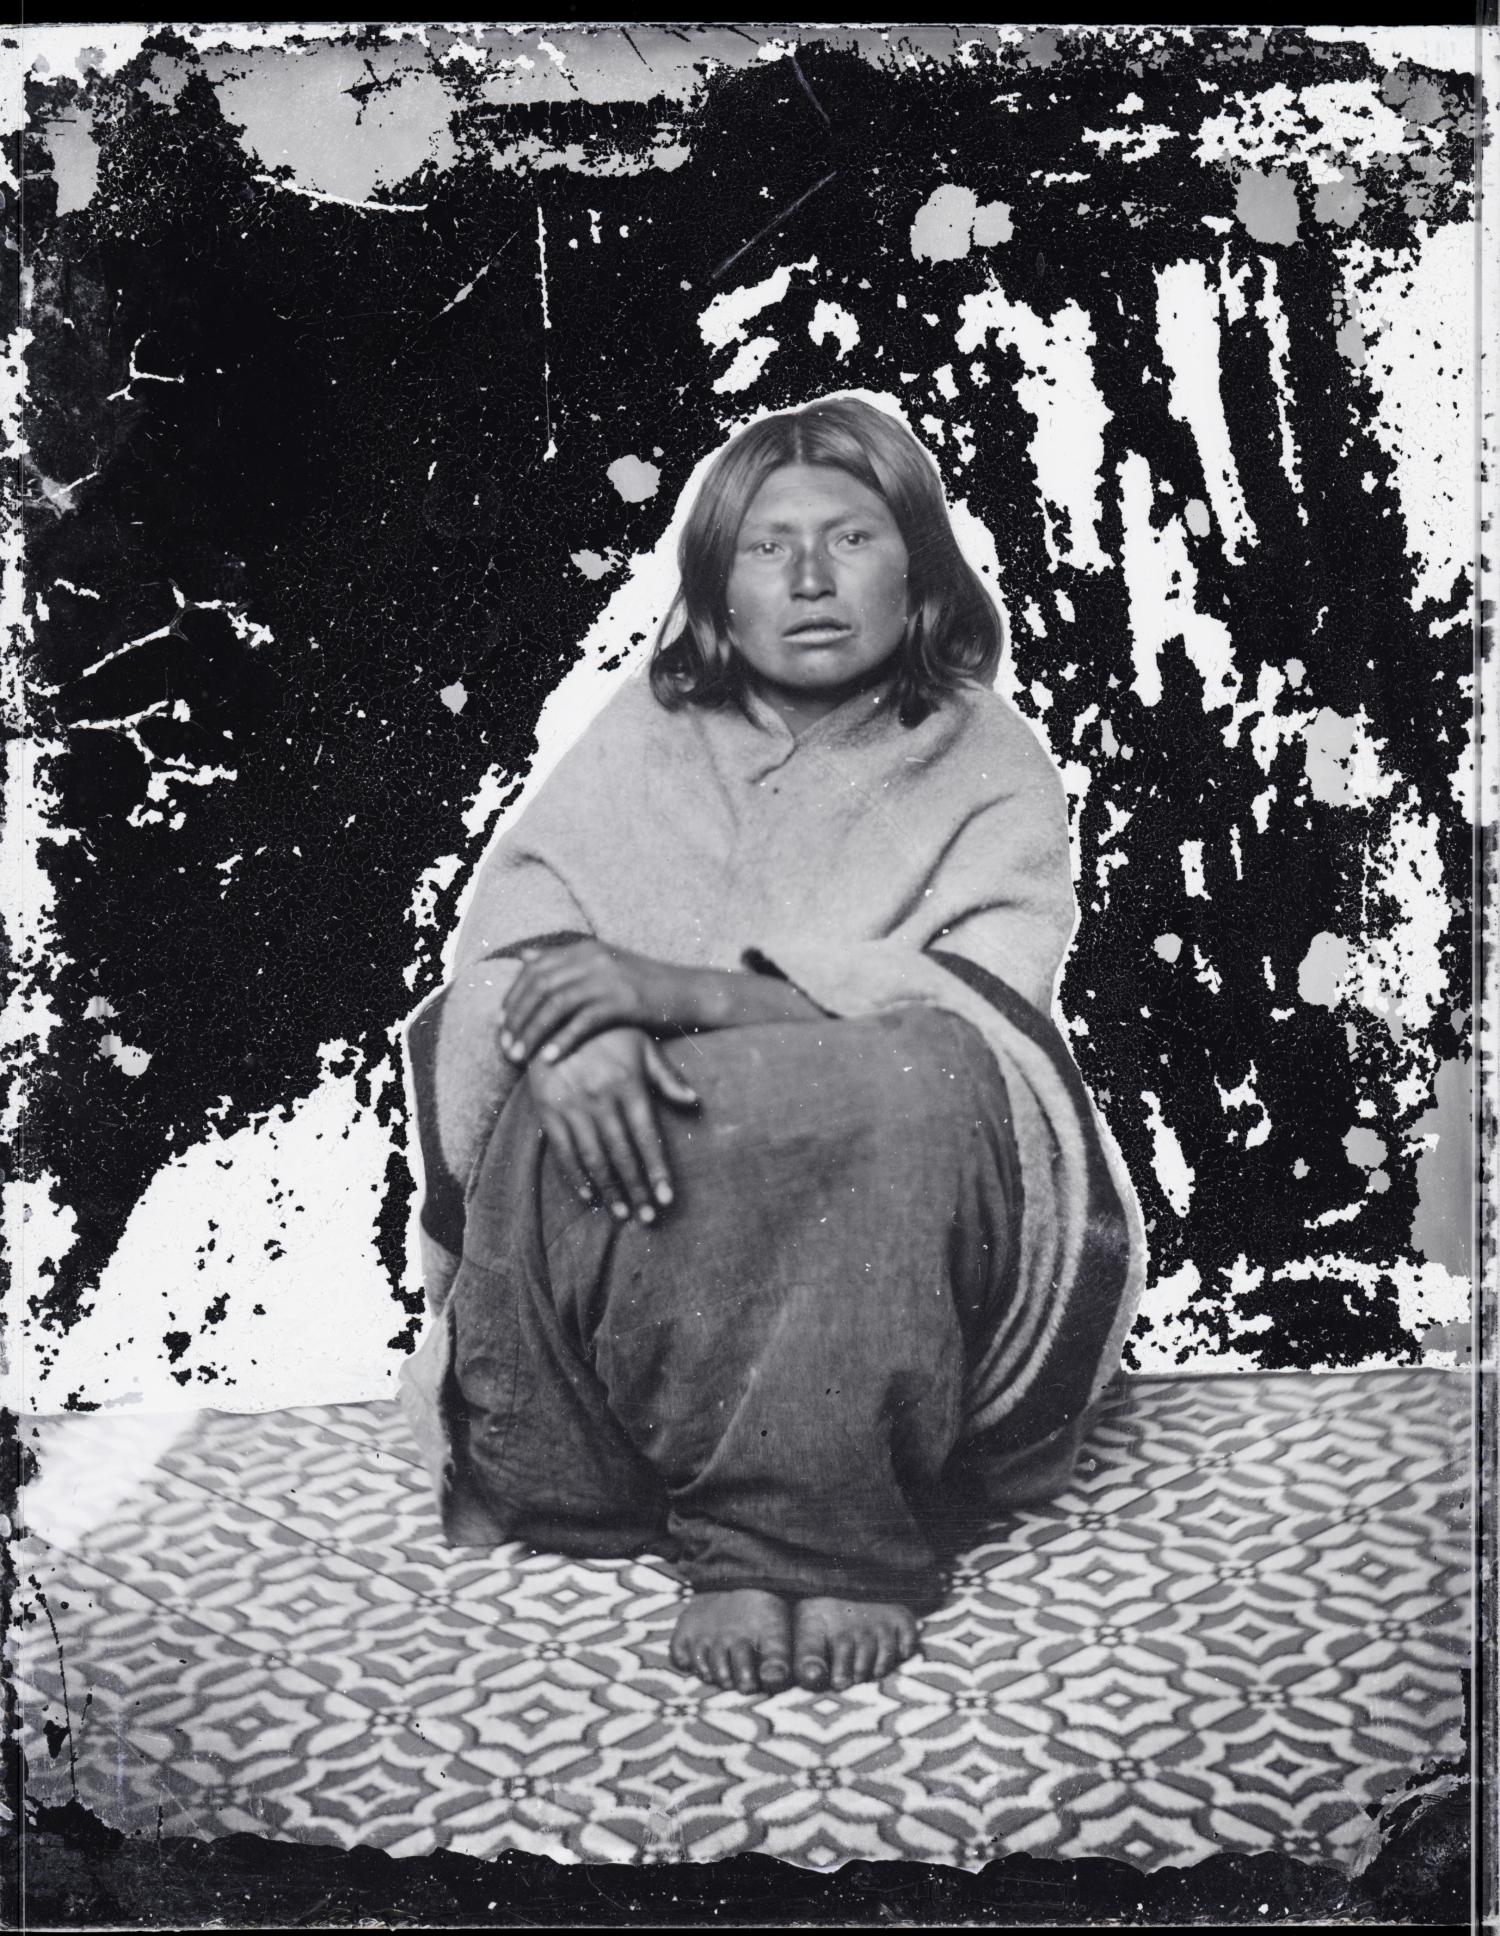 Portrait of an unidentified Indigenous individual seated.